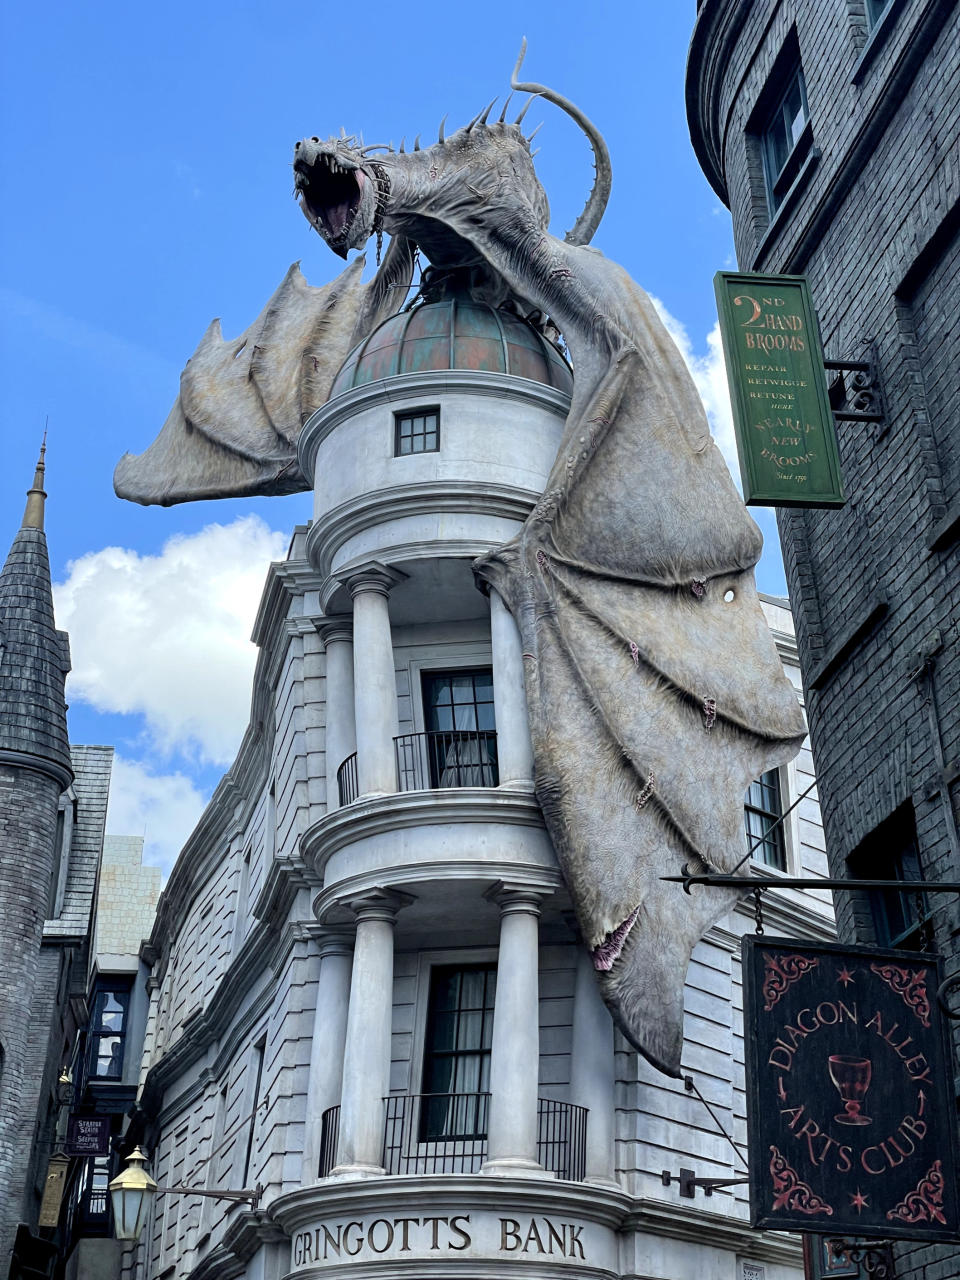 A photo of a large dragon on top of a crooked building